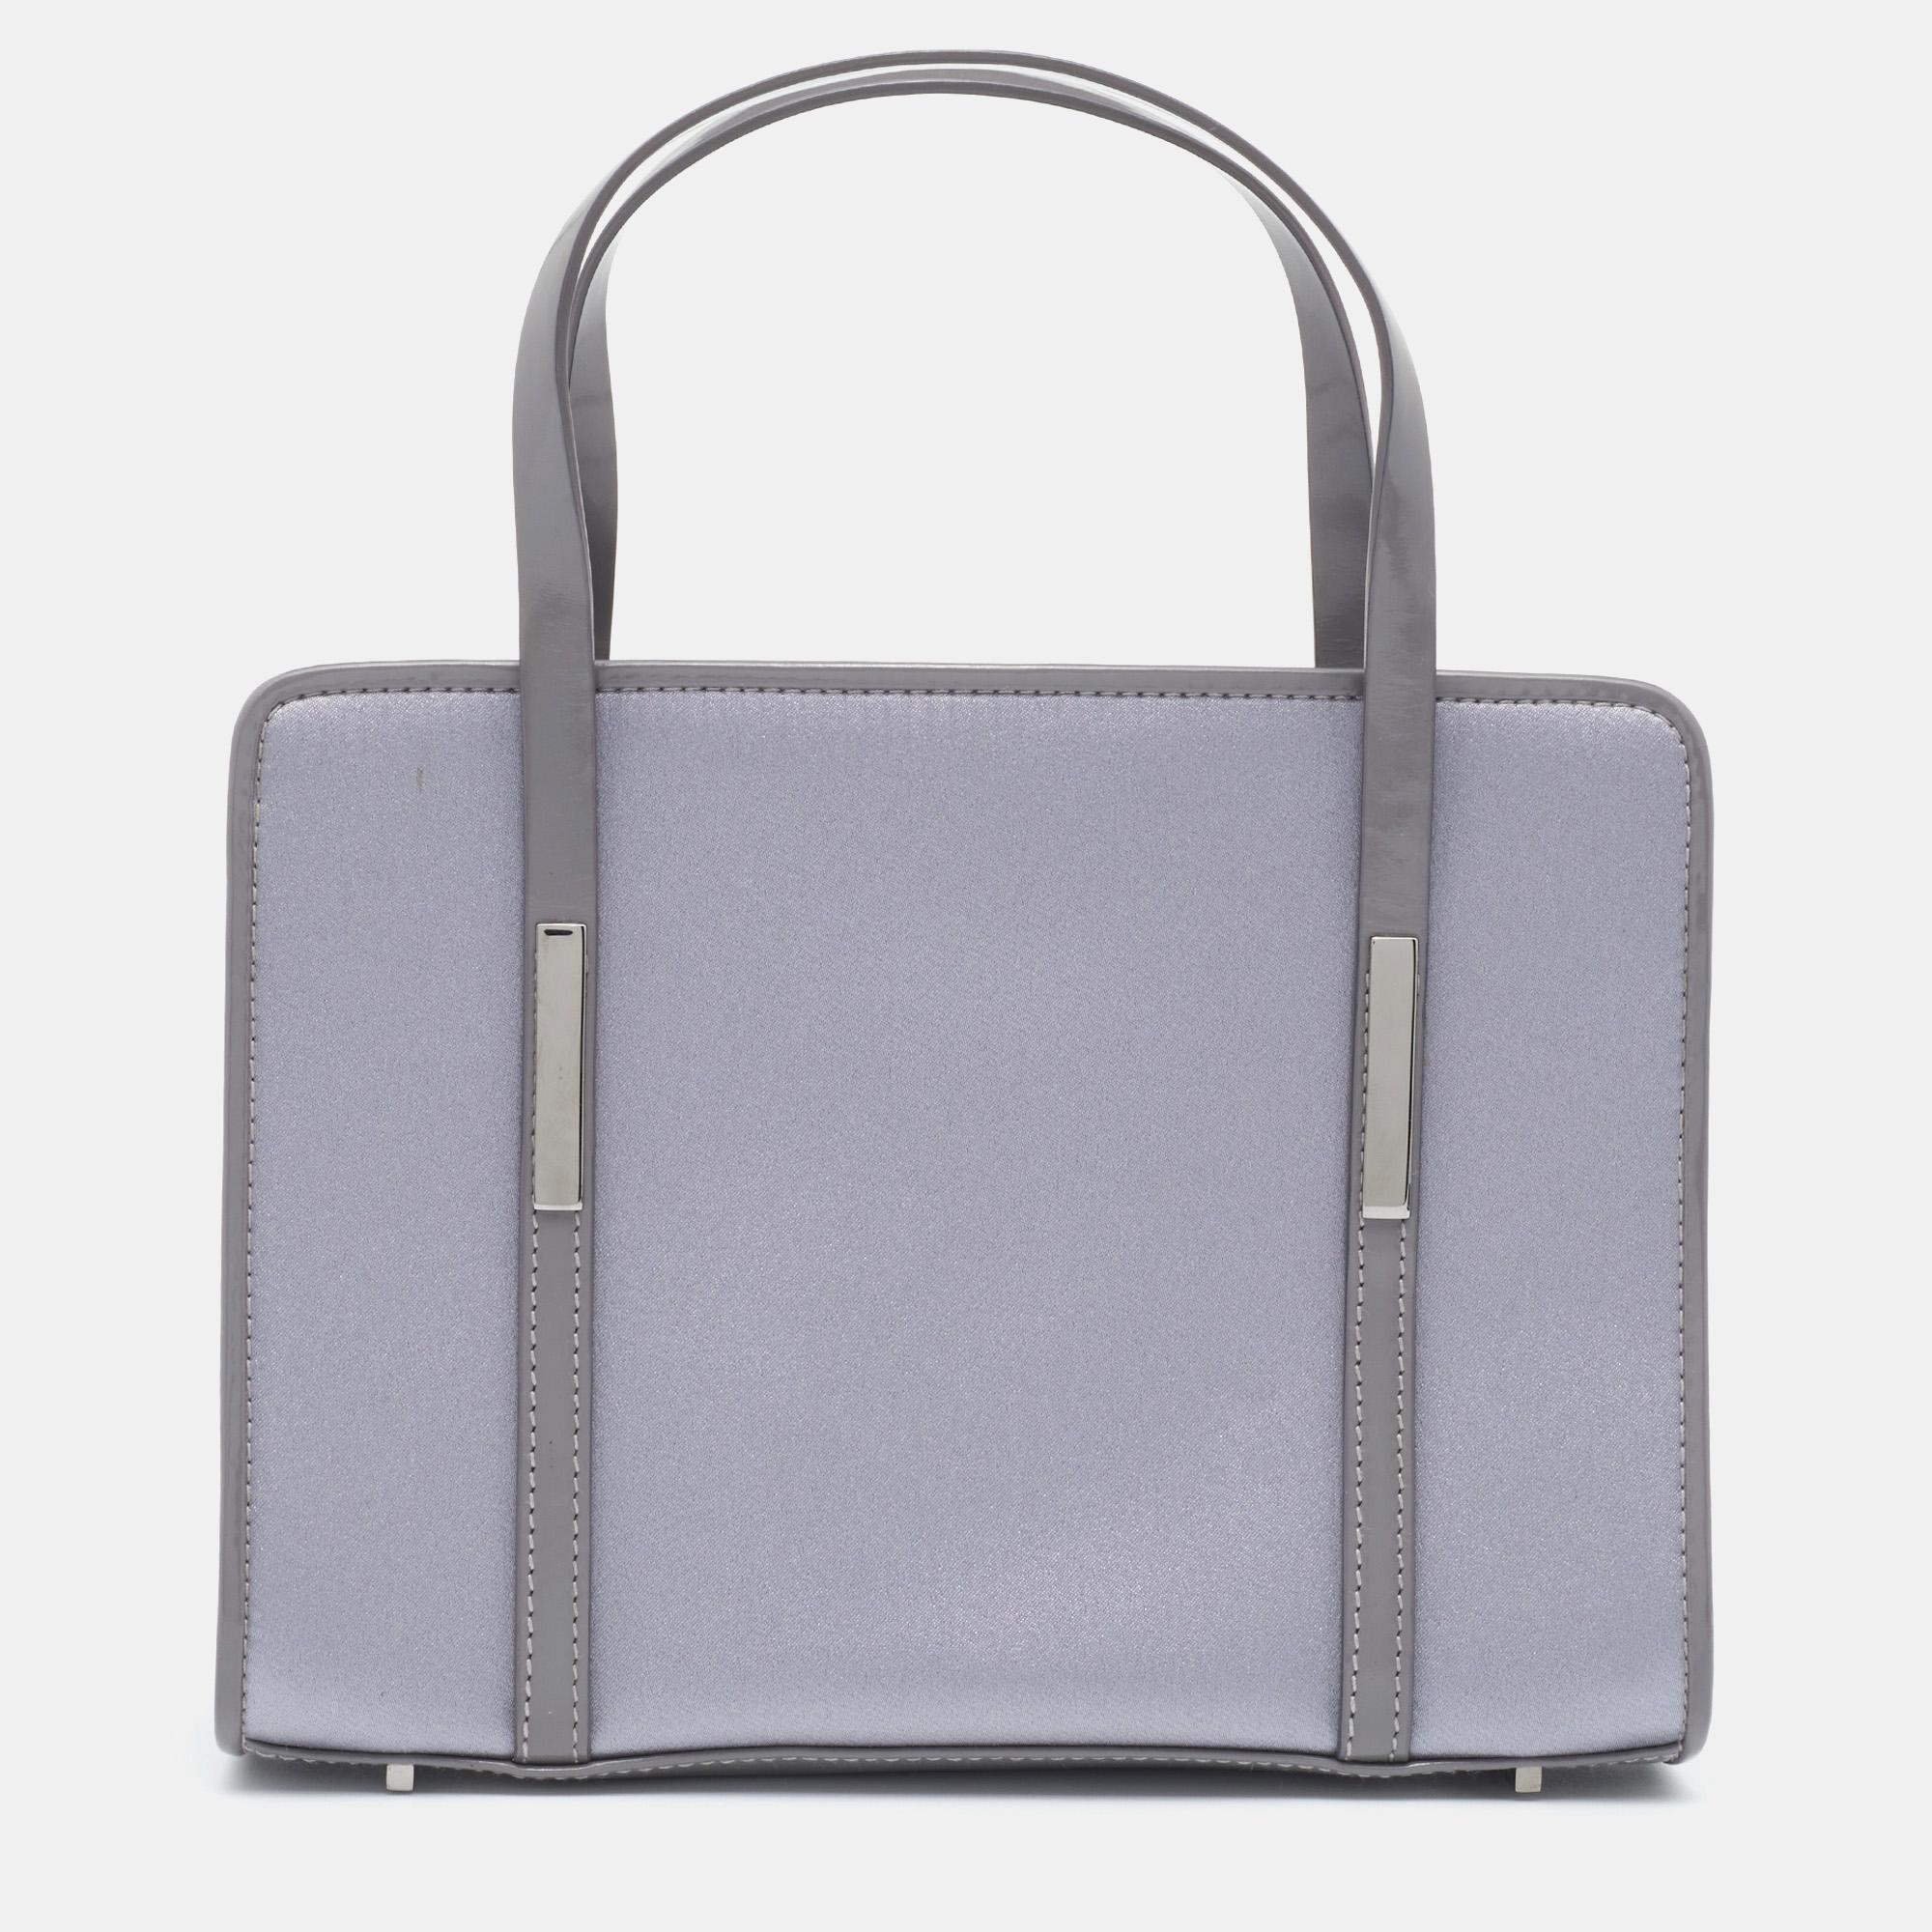 Keep things chic with this well-constructed Gucci bag. Made from satin and patent leather, it can be held by dual handles at the top, and it is adorned with silver-tone accents. Lined with fabric, its interior is equipped with pockets to carry your